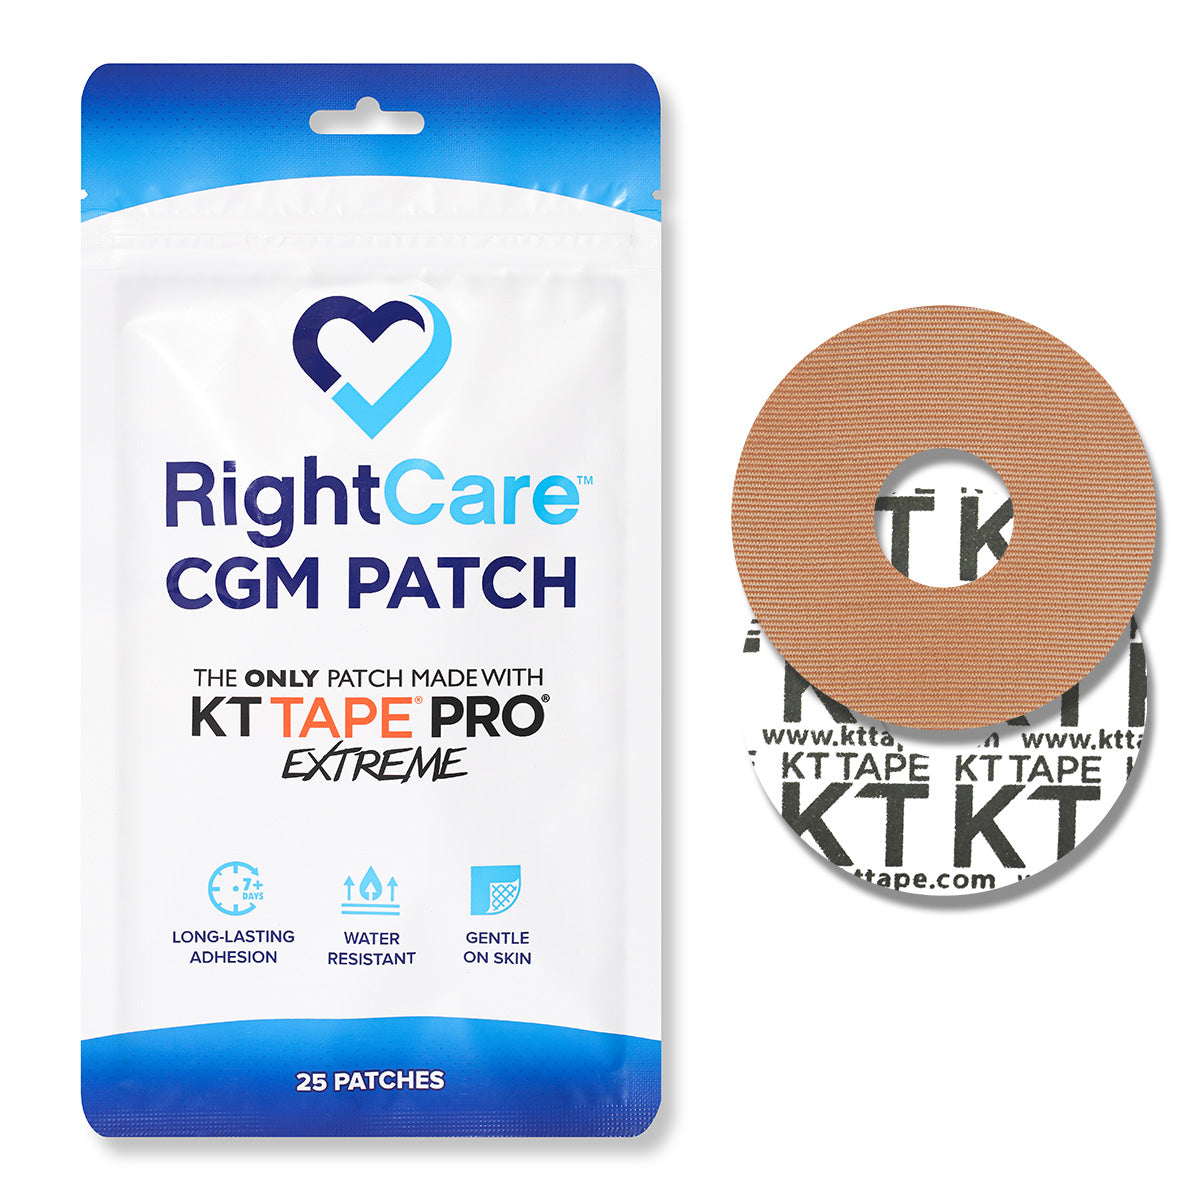 RightCare CGM Adhesive Patch made with KT Tape, Libre, Bag of 25 97535148